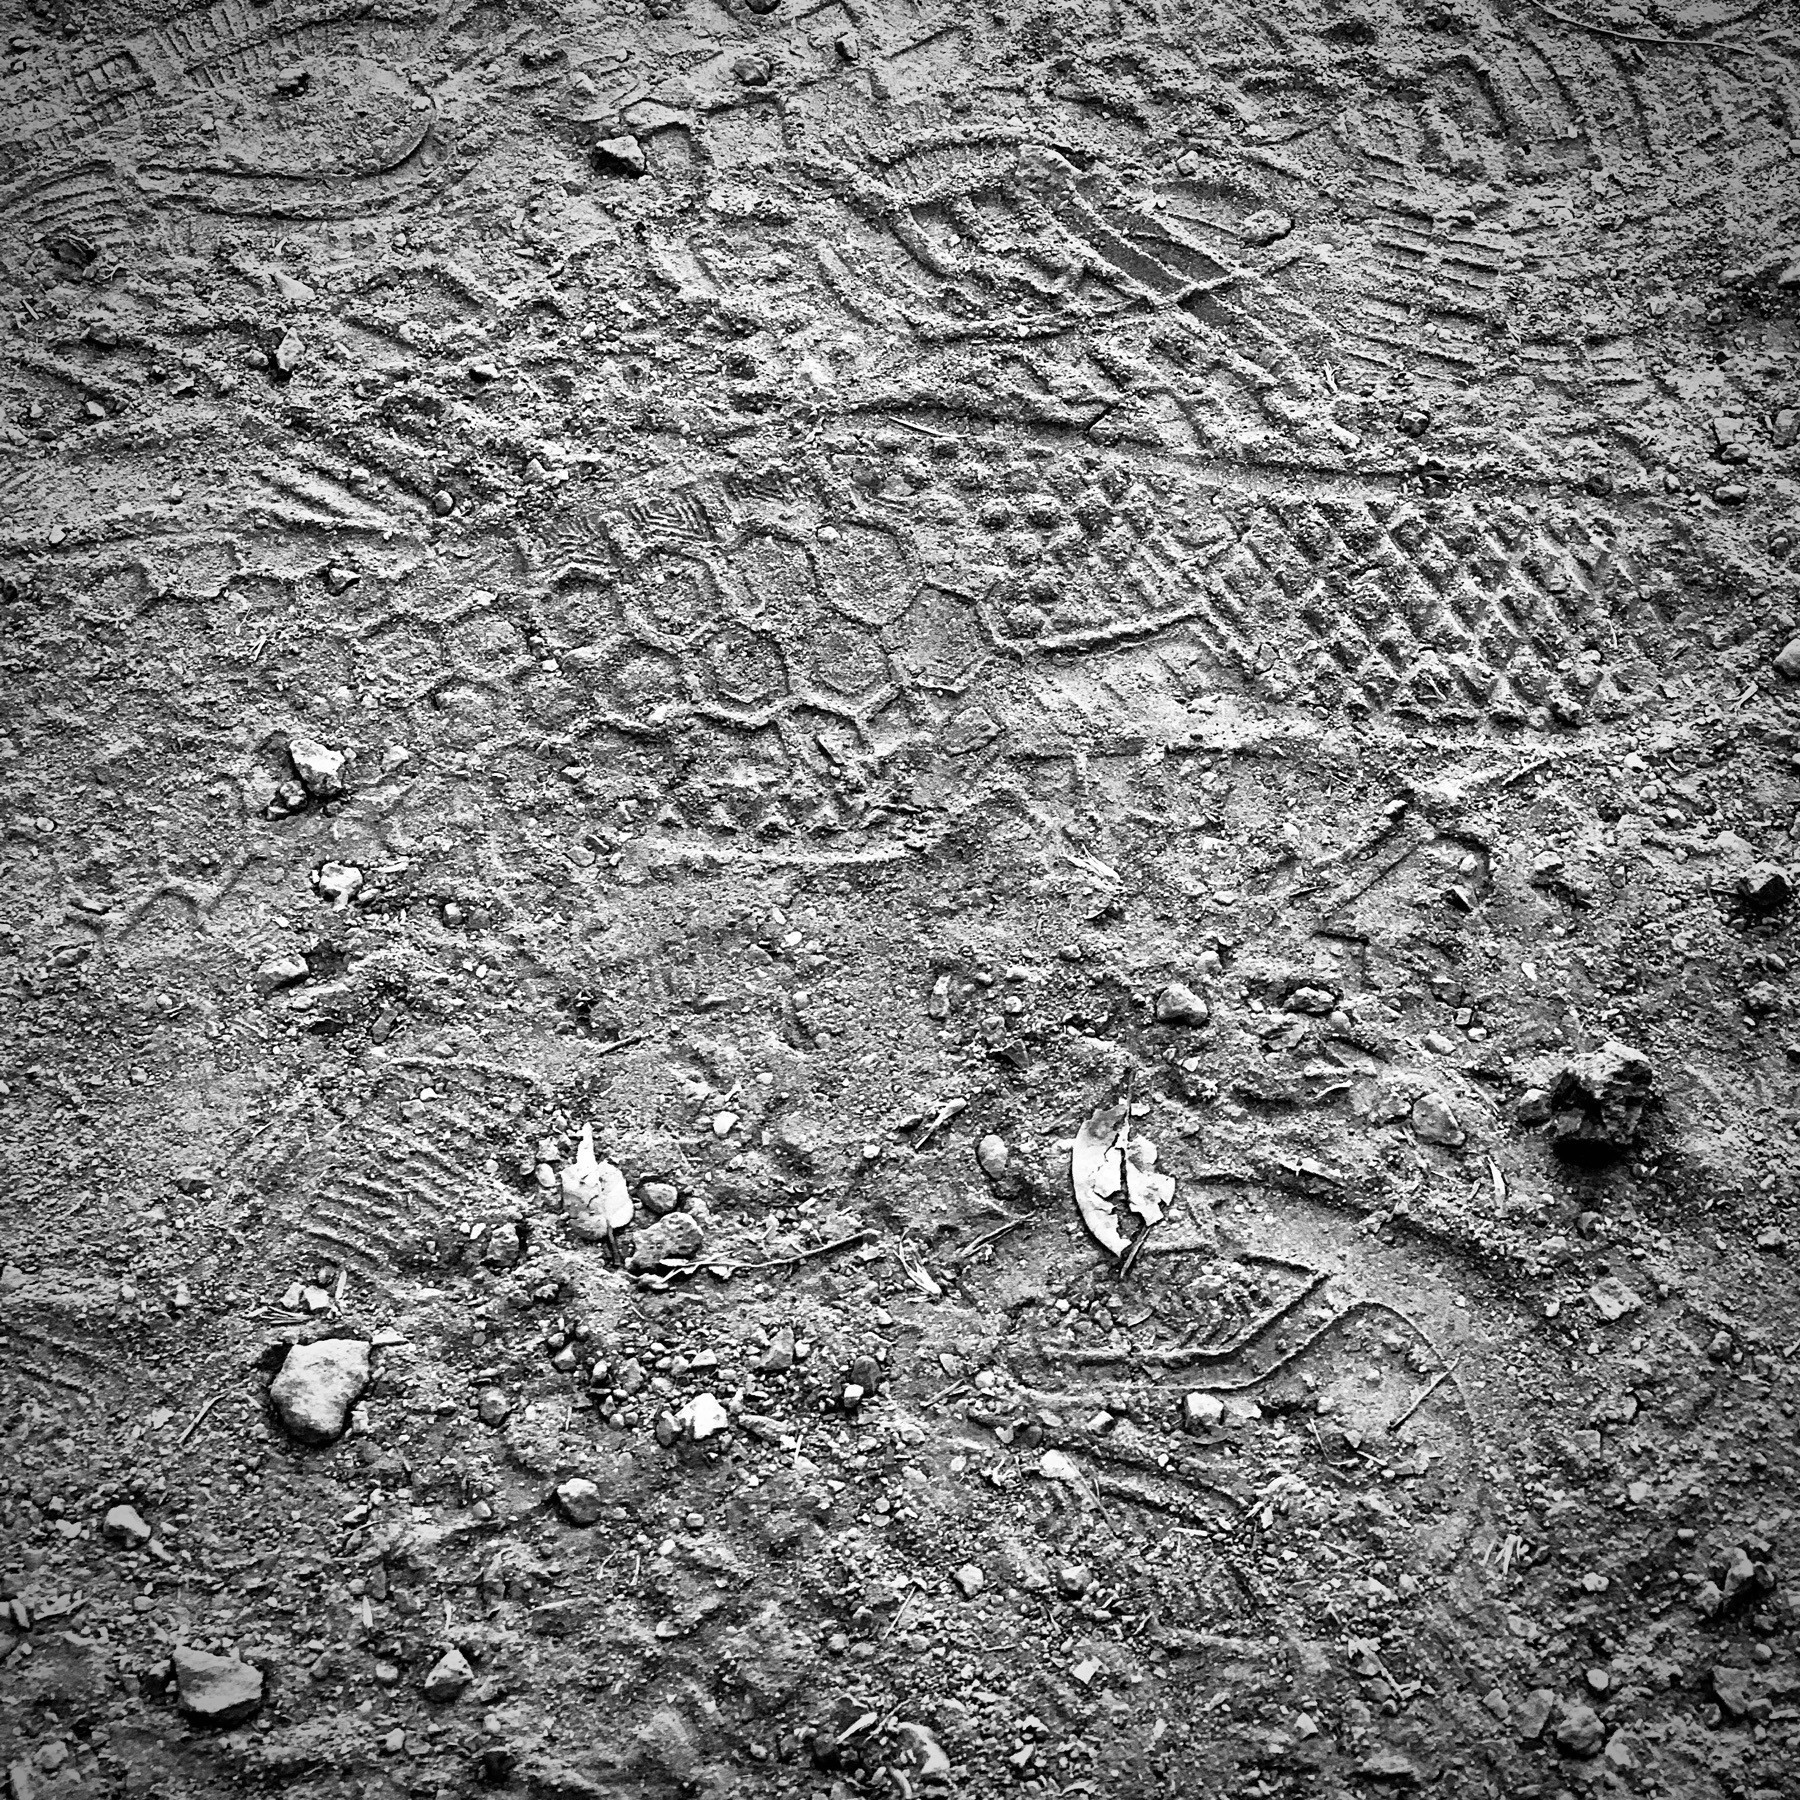 Footprints in dusty rock path, black and white.